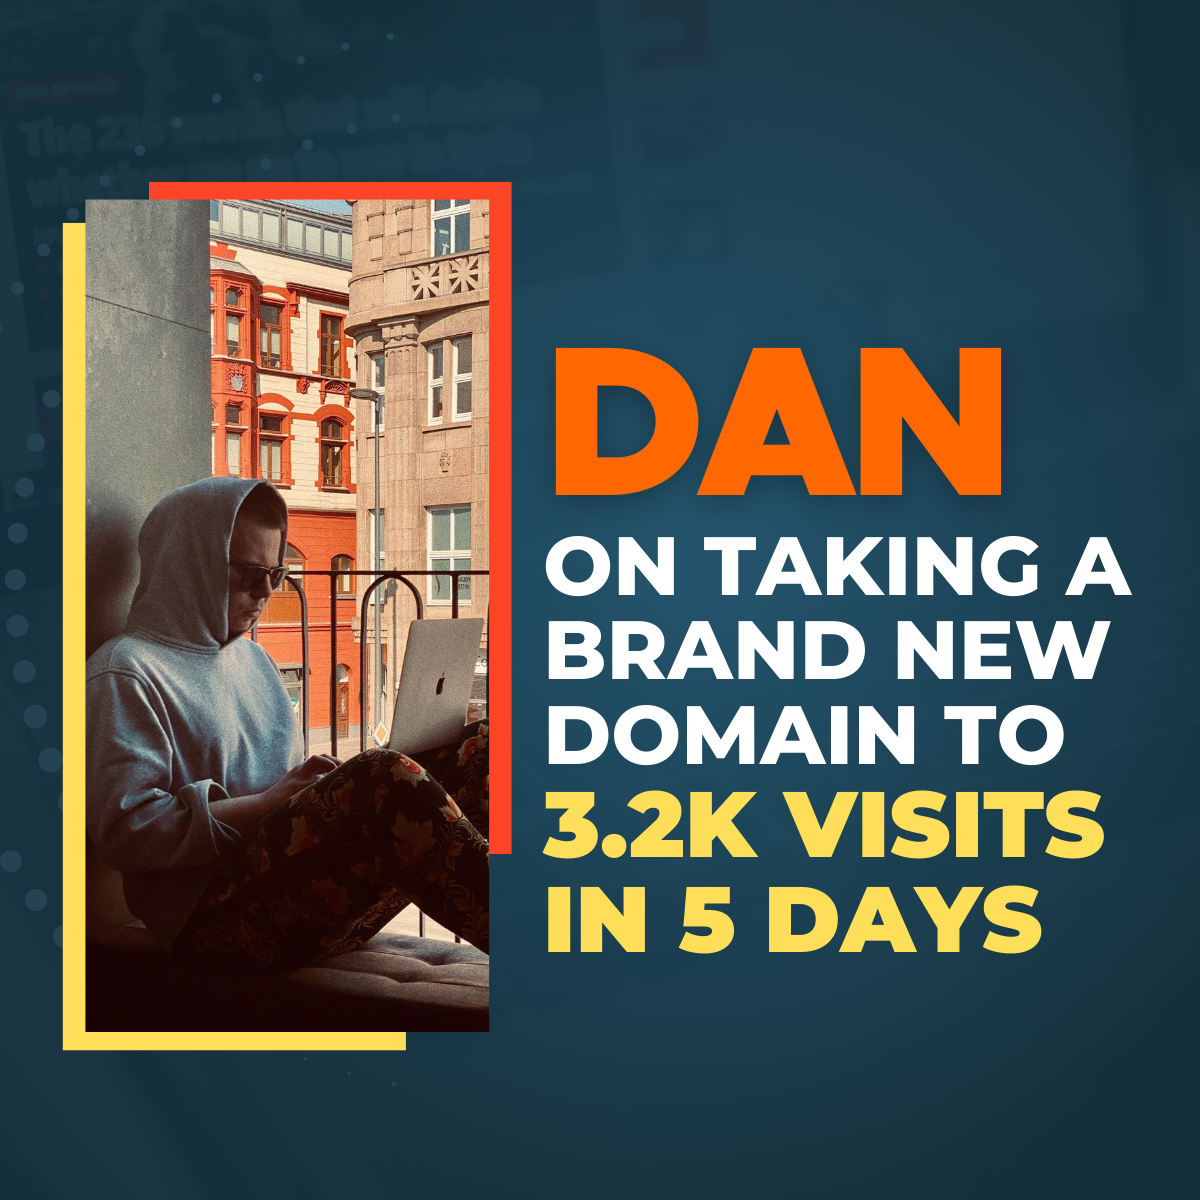 Dan on taking a brand new domain to 3.2k visits in 5 days